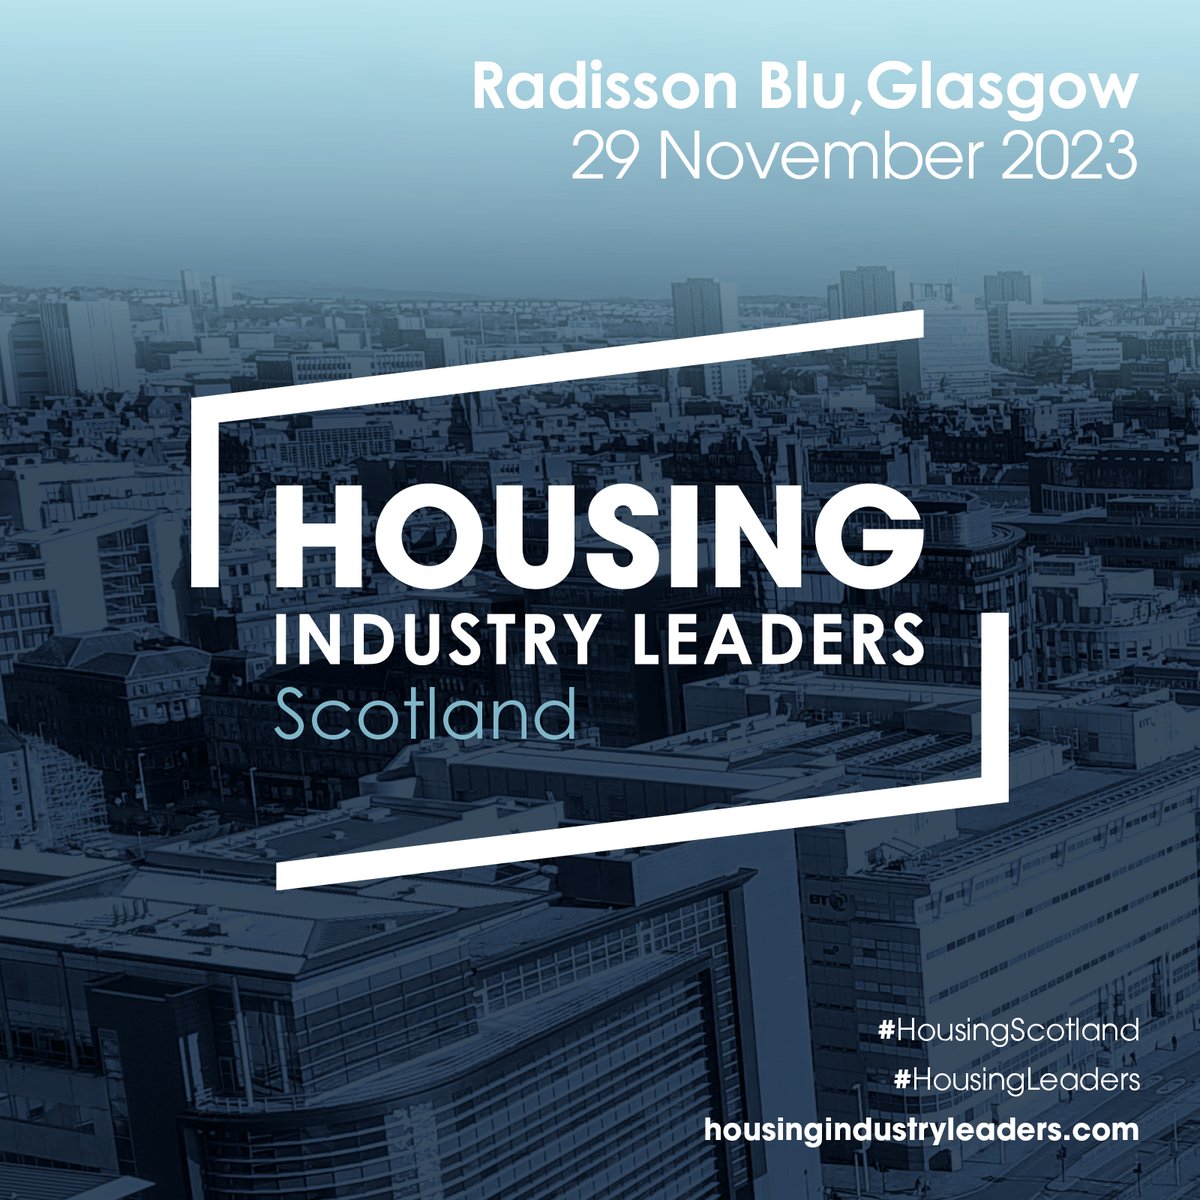 🏡 If you are a local authority, housing association, developer, architect, policy maker, or industry professional, join us at Housing Industry Leaders Scotland. 

Click here to secure your place ➡️ow.ly/GXxJ50OboVl

#ConnectingScotland #HousingLeaders #Housing